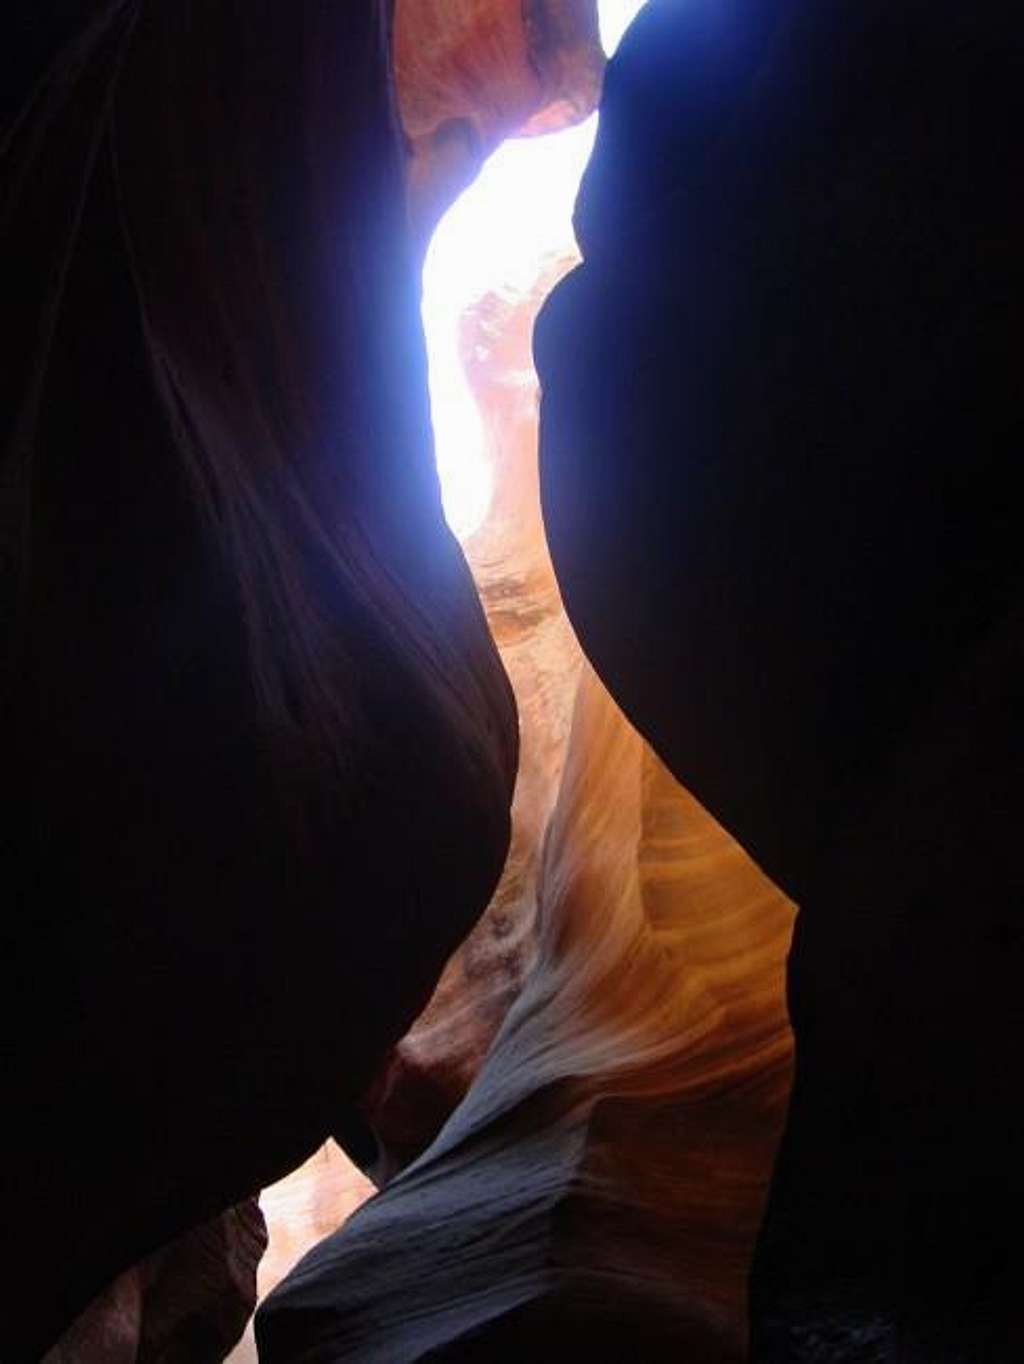 The Keyhole- One of Zion's...